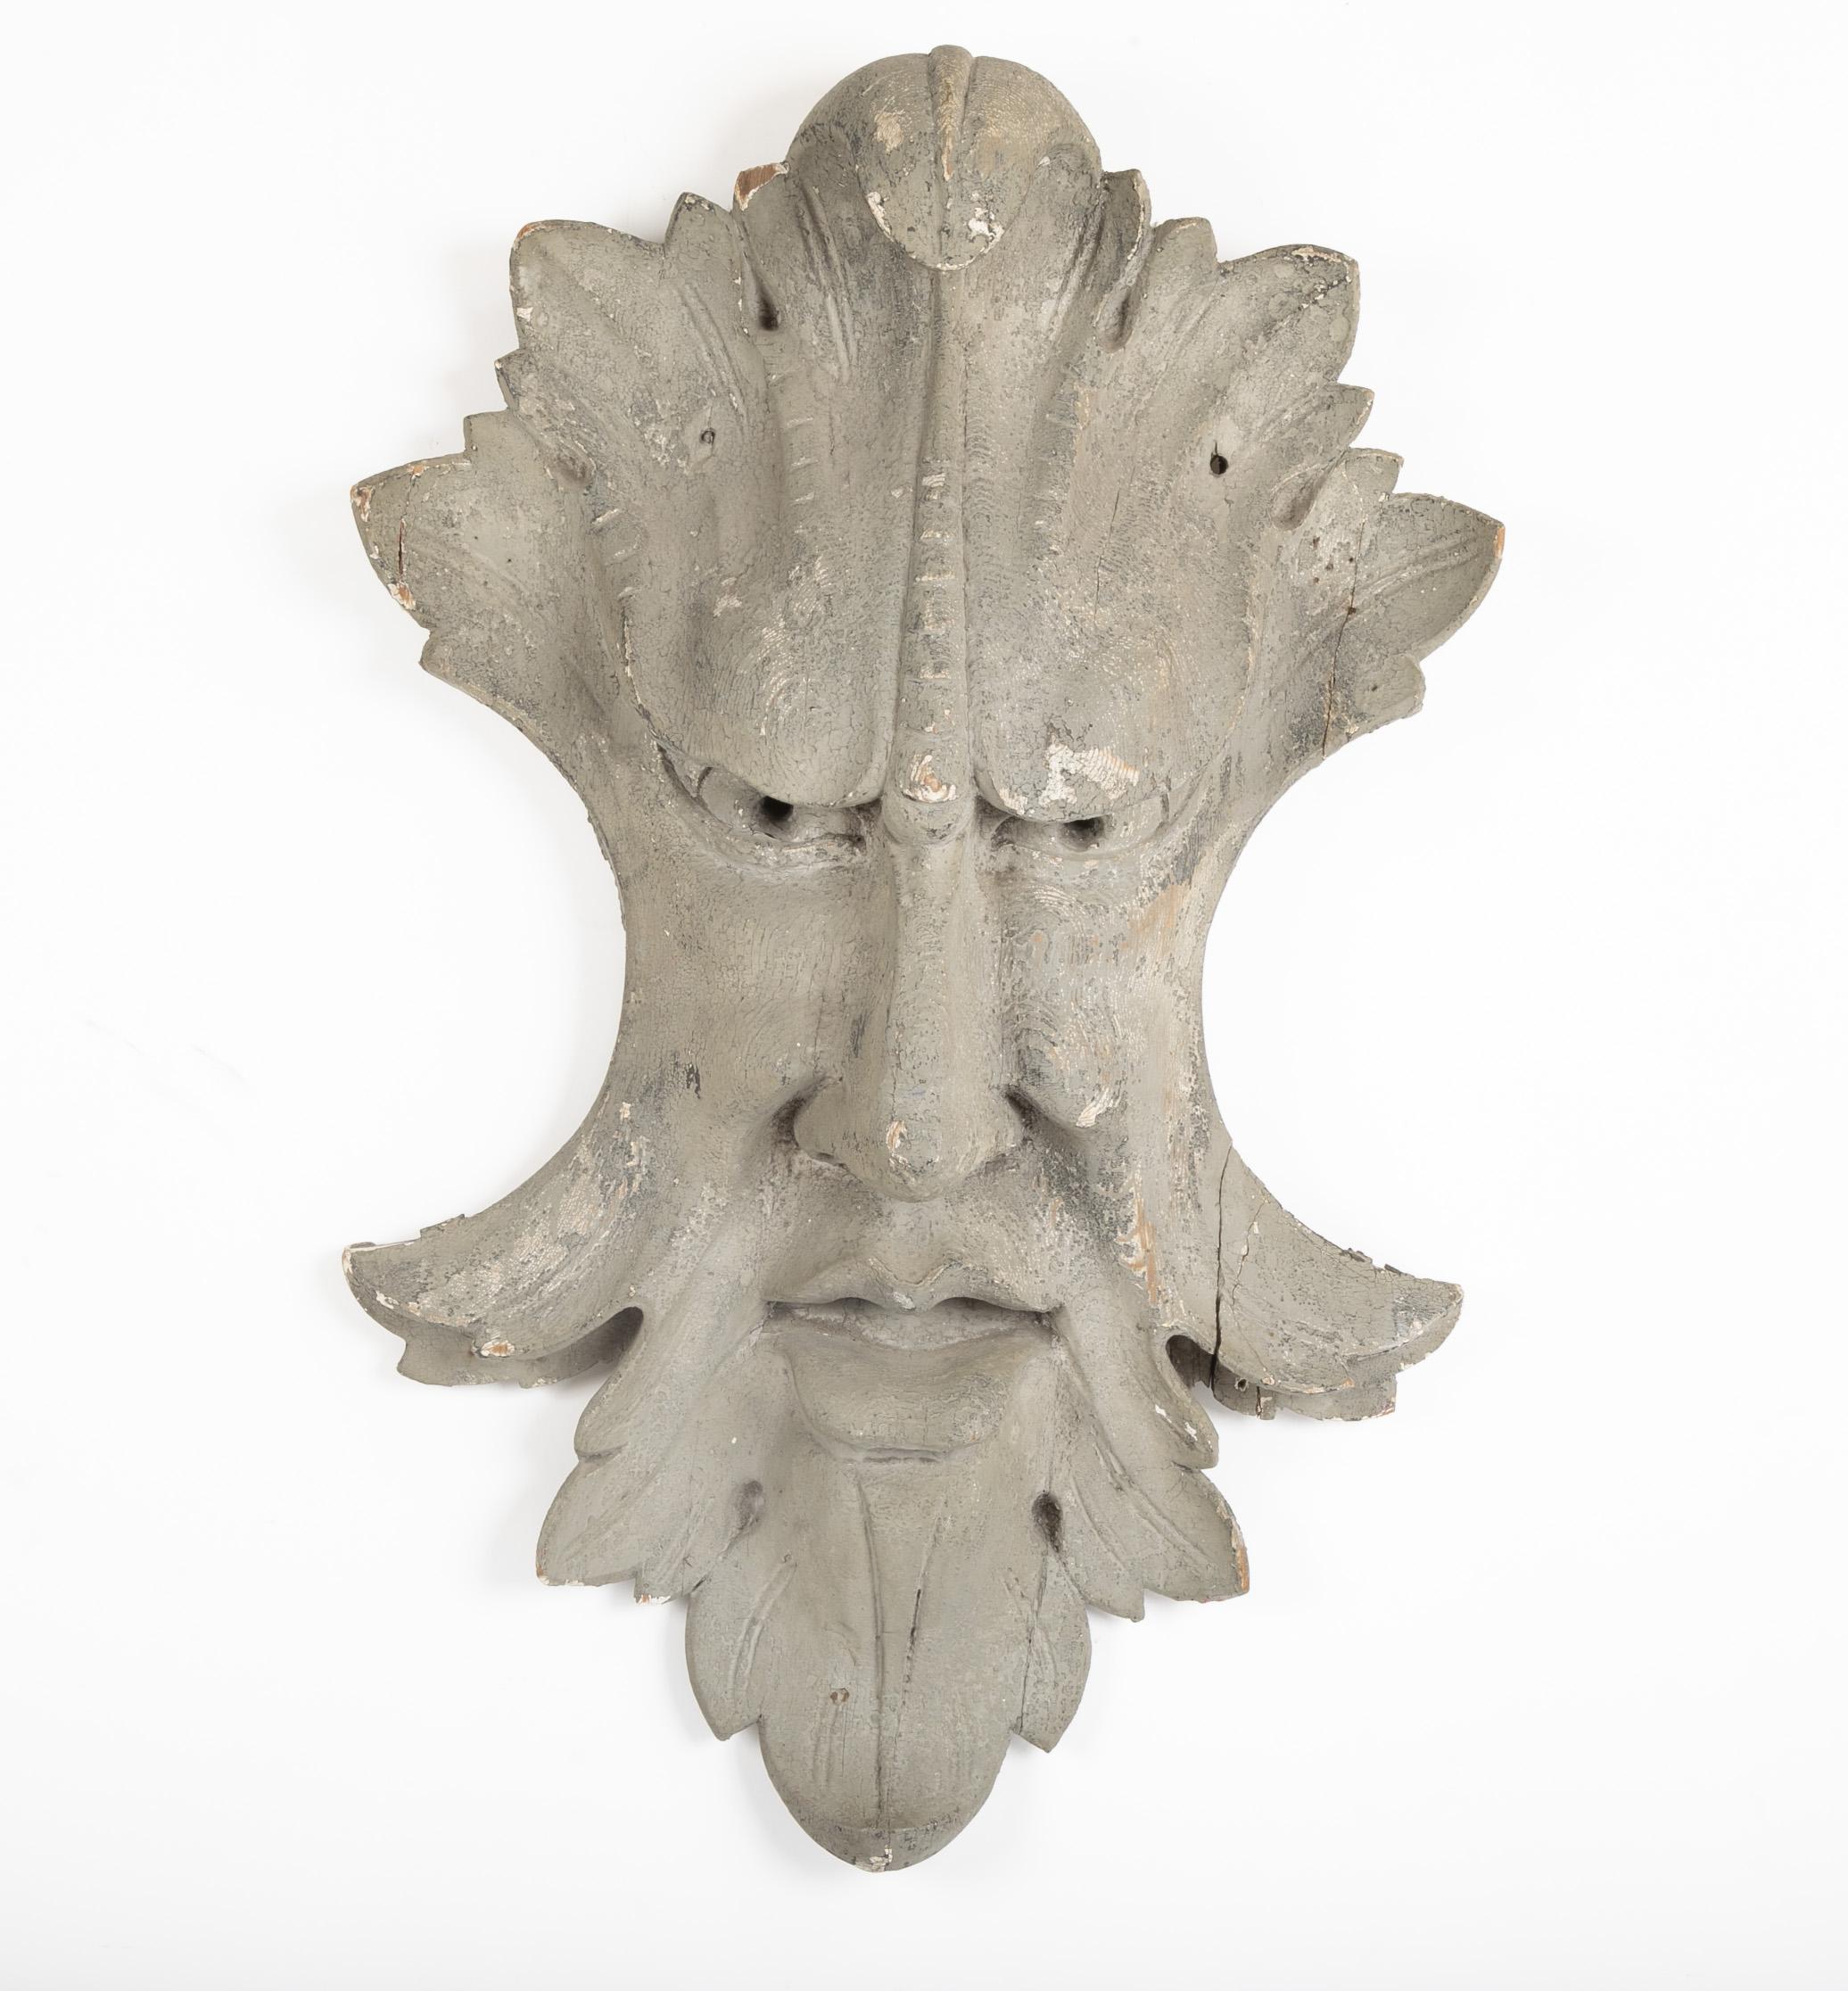 An architectural element featuring an Acanthus leaf surrounding a face.